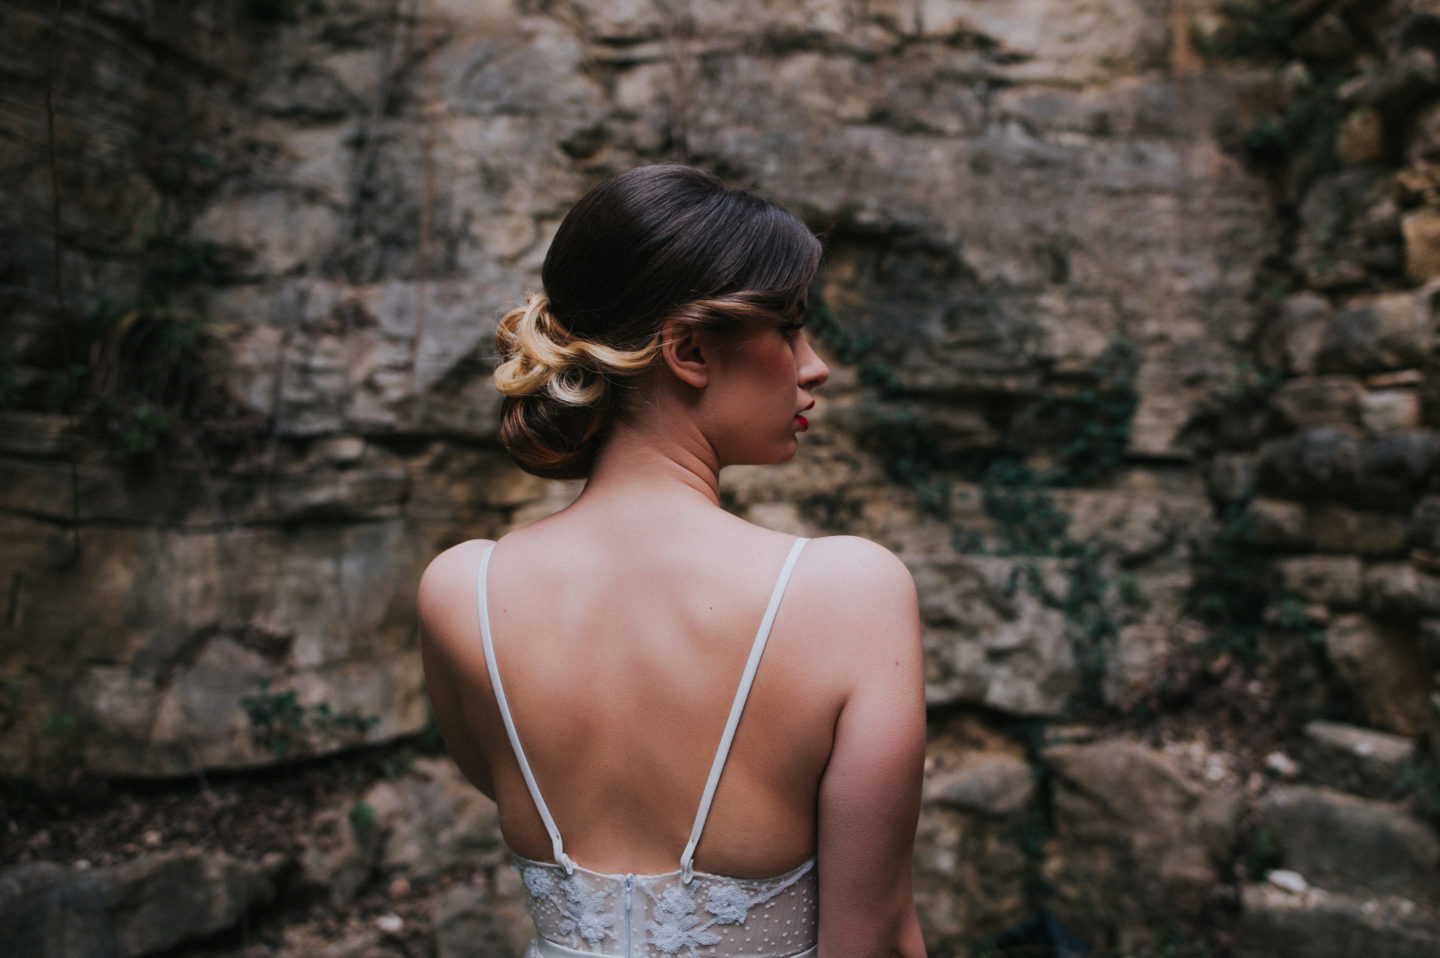 Botanical Castle Wedding with Contemporary Vibes at Dvigrad Ruins, Croatia